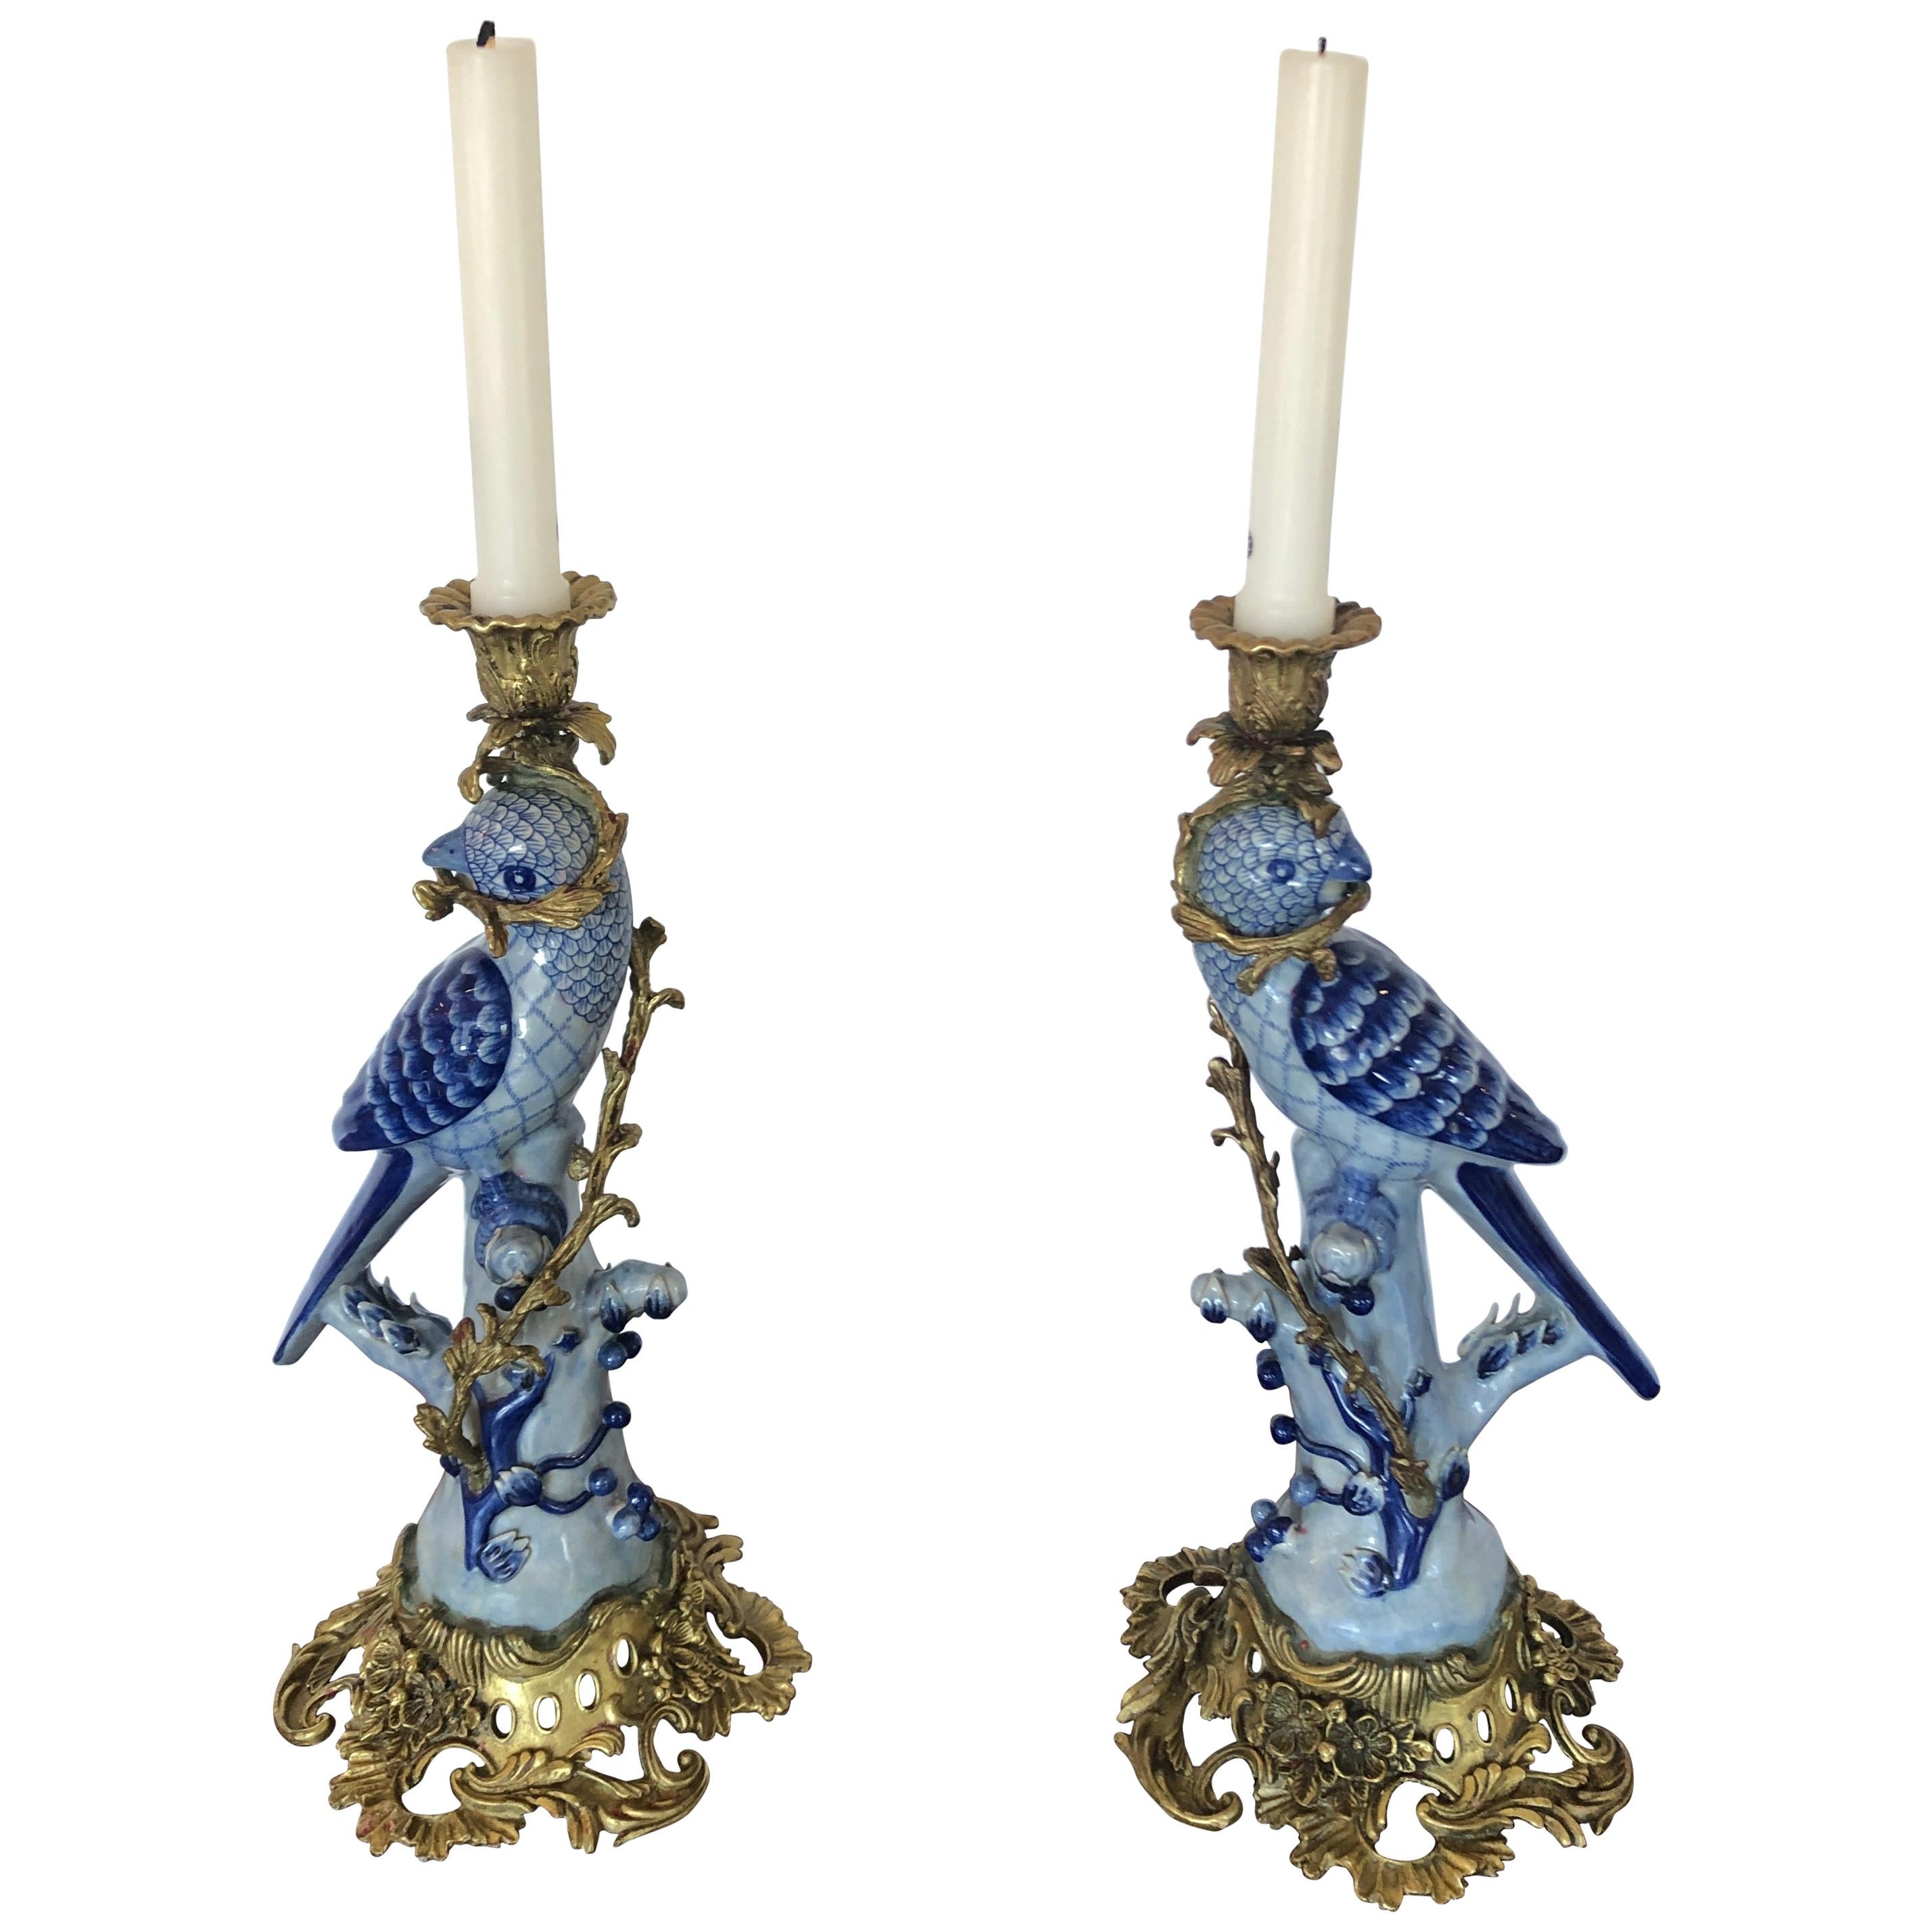 Parrot Candlestick - 4 For Sale on 1stDibs | parrot candlesticks 